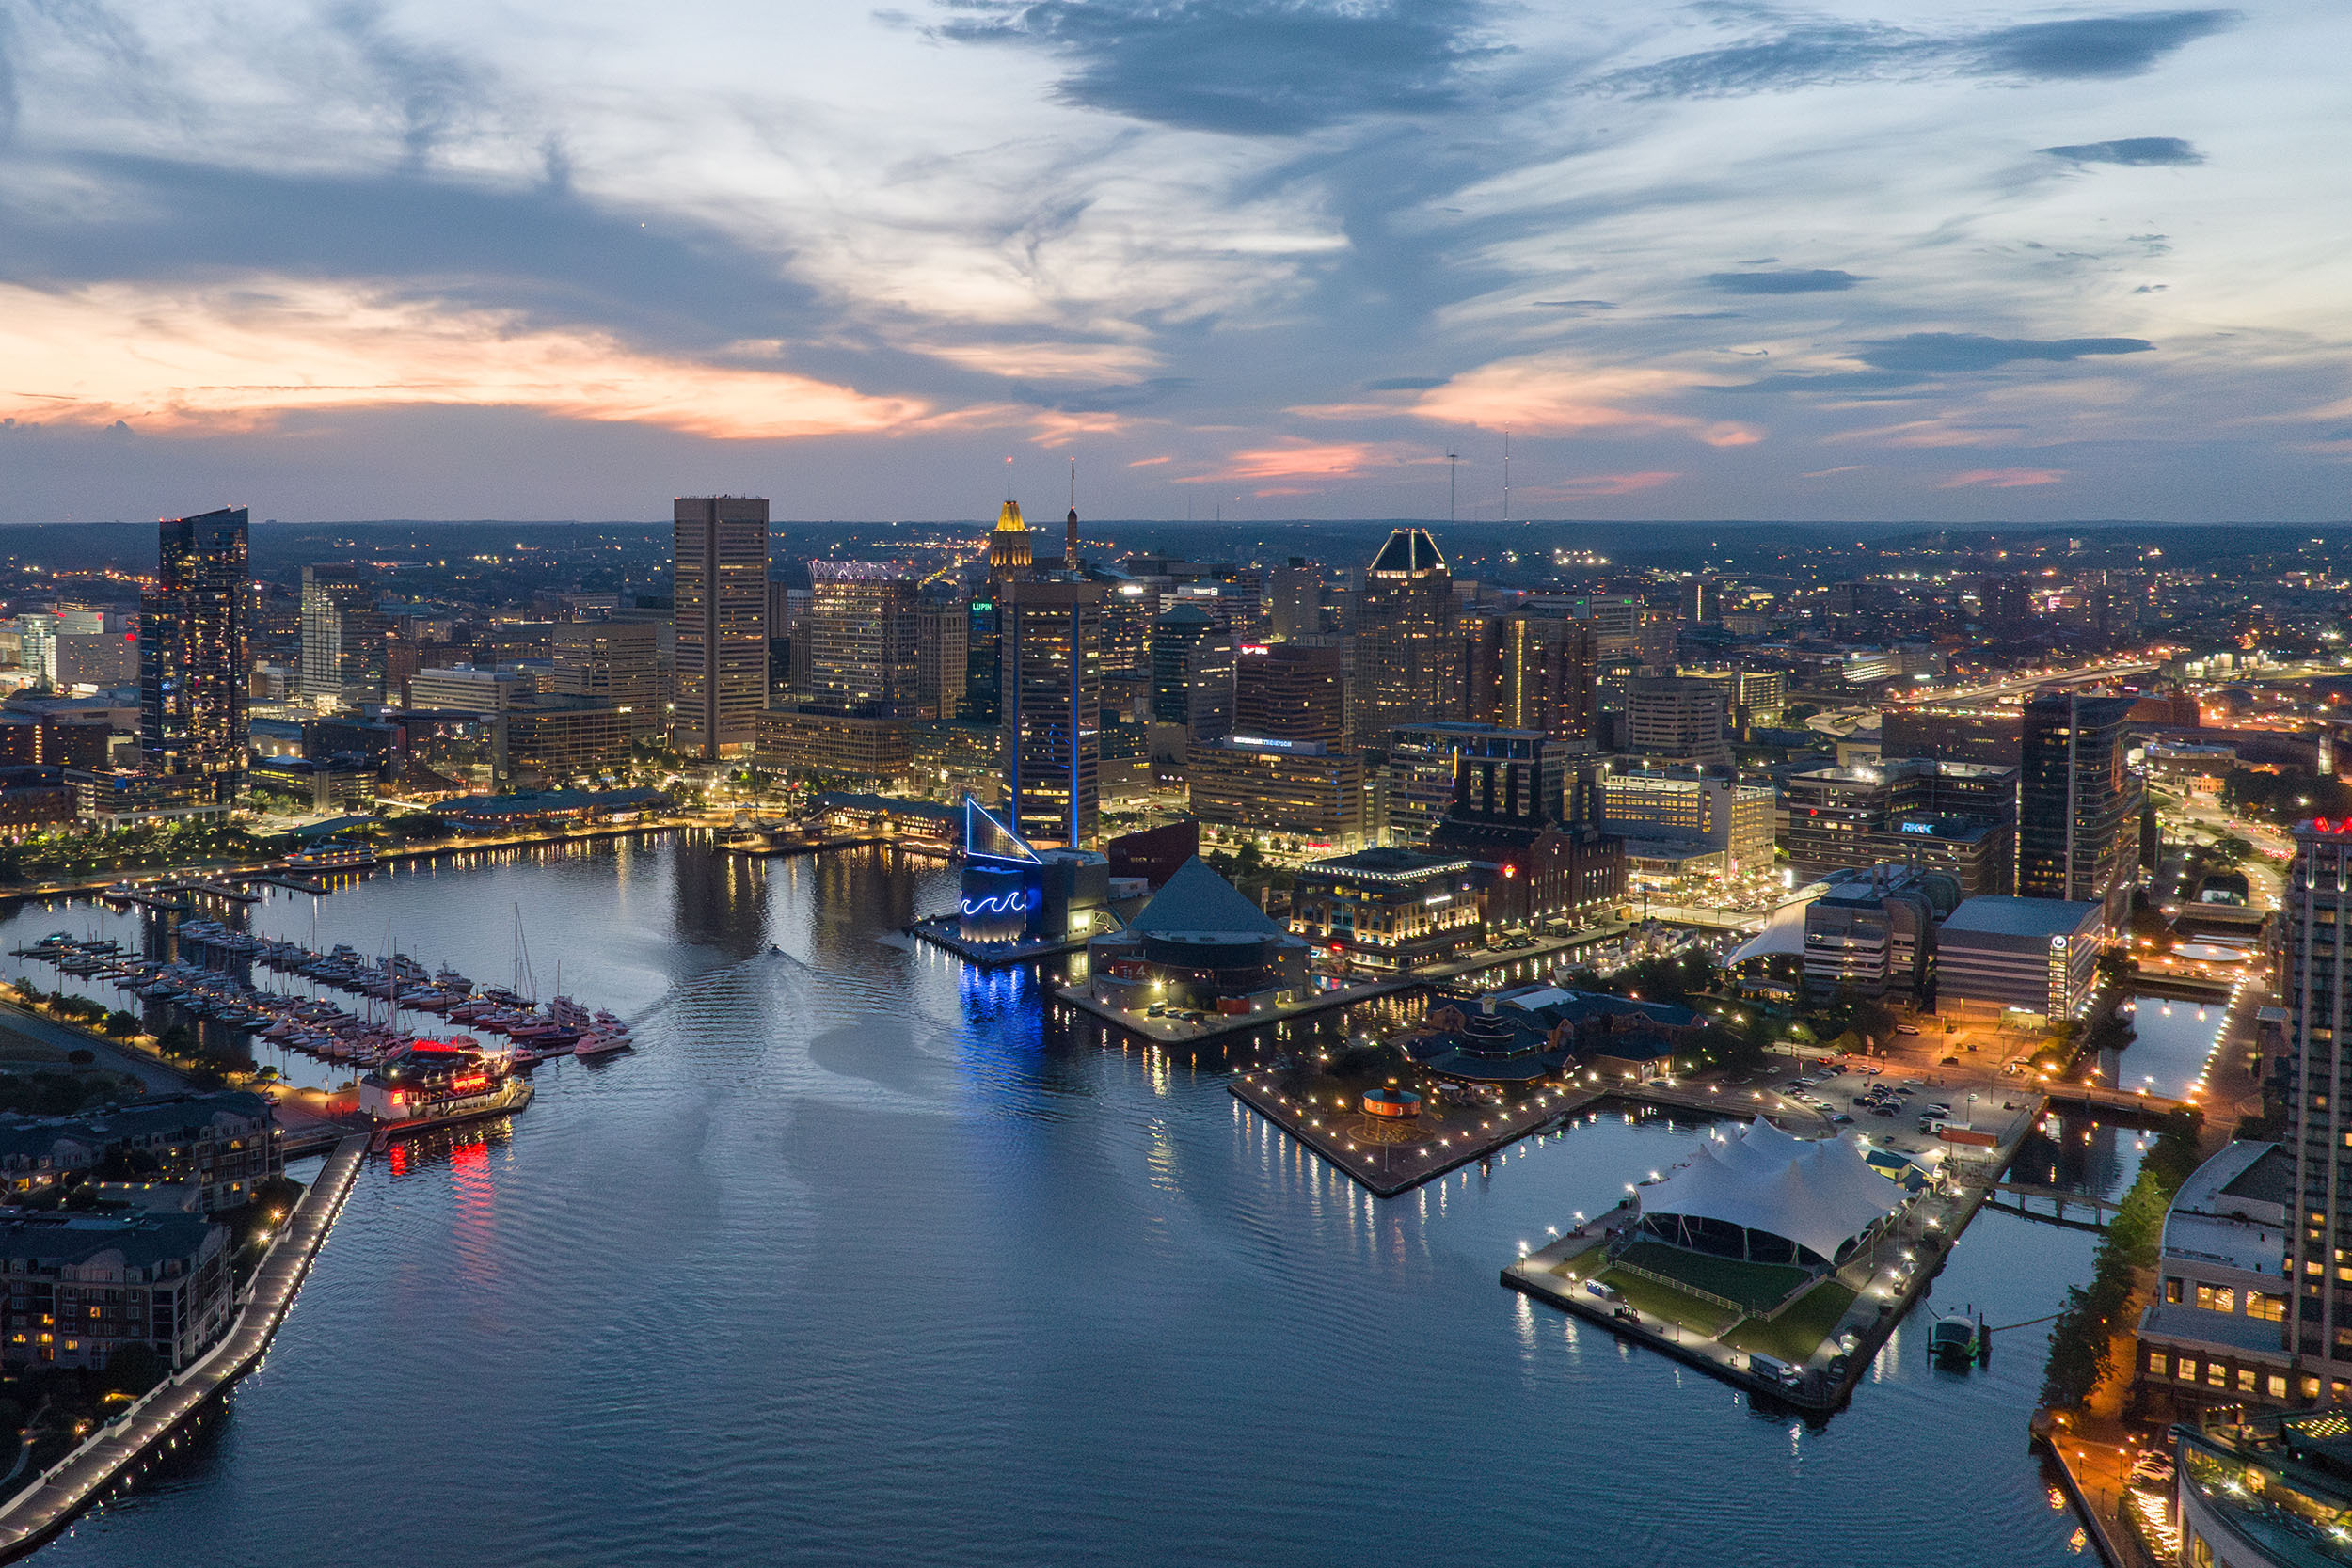 Aerial View of the Inner Harbor at Dusk With the City Lights Shining From the Perspective Over the Water